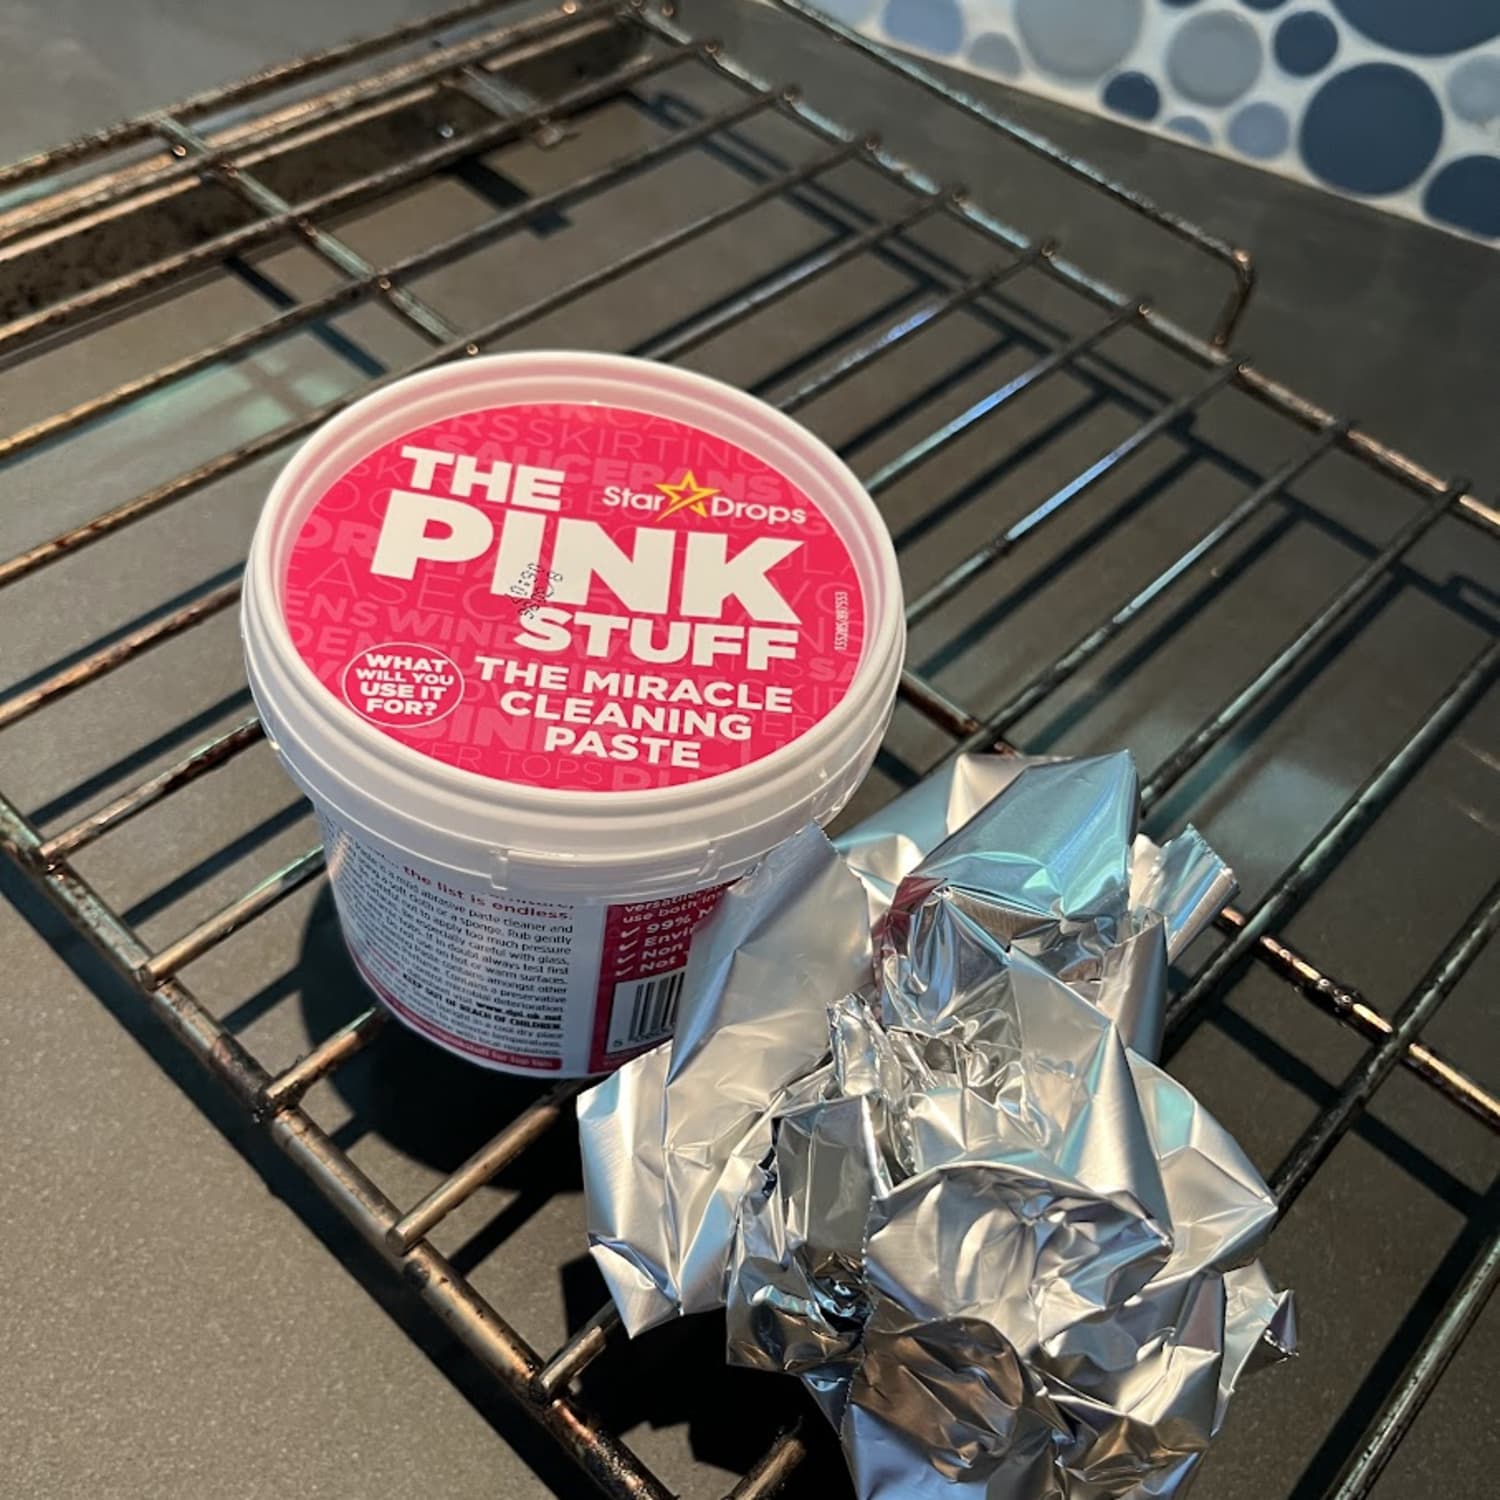 OVEN CLEANING WITH THE PINK STUFF 